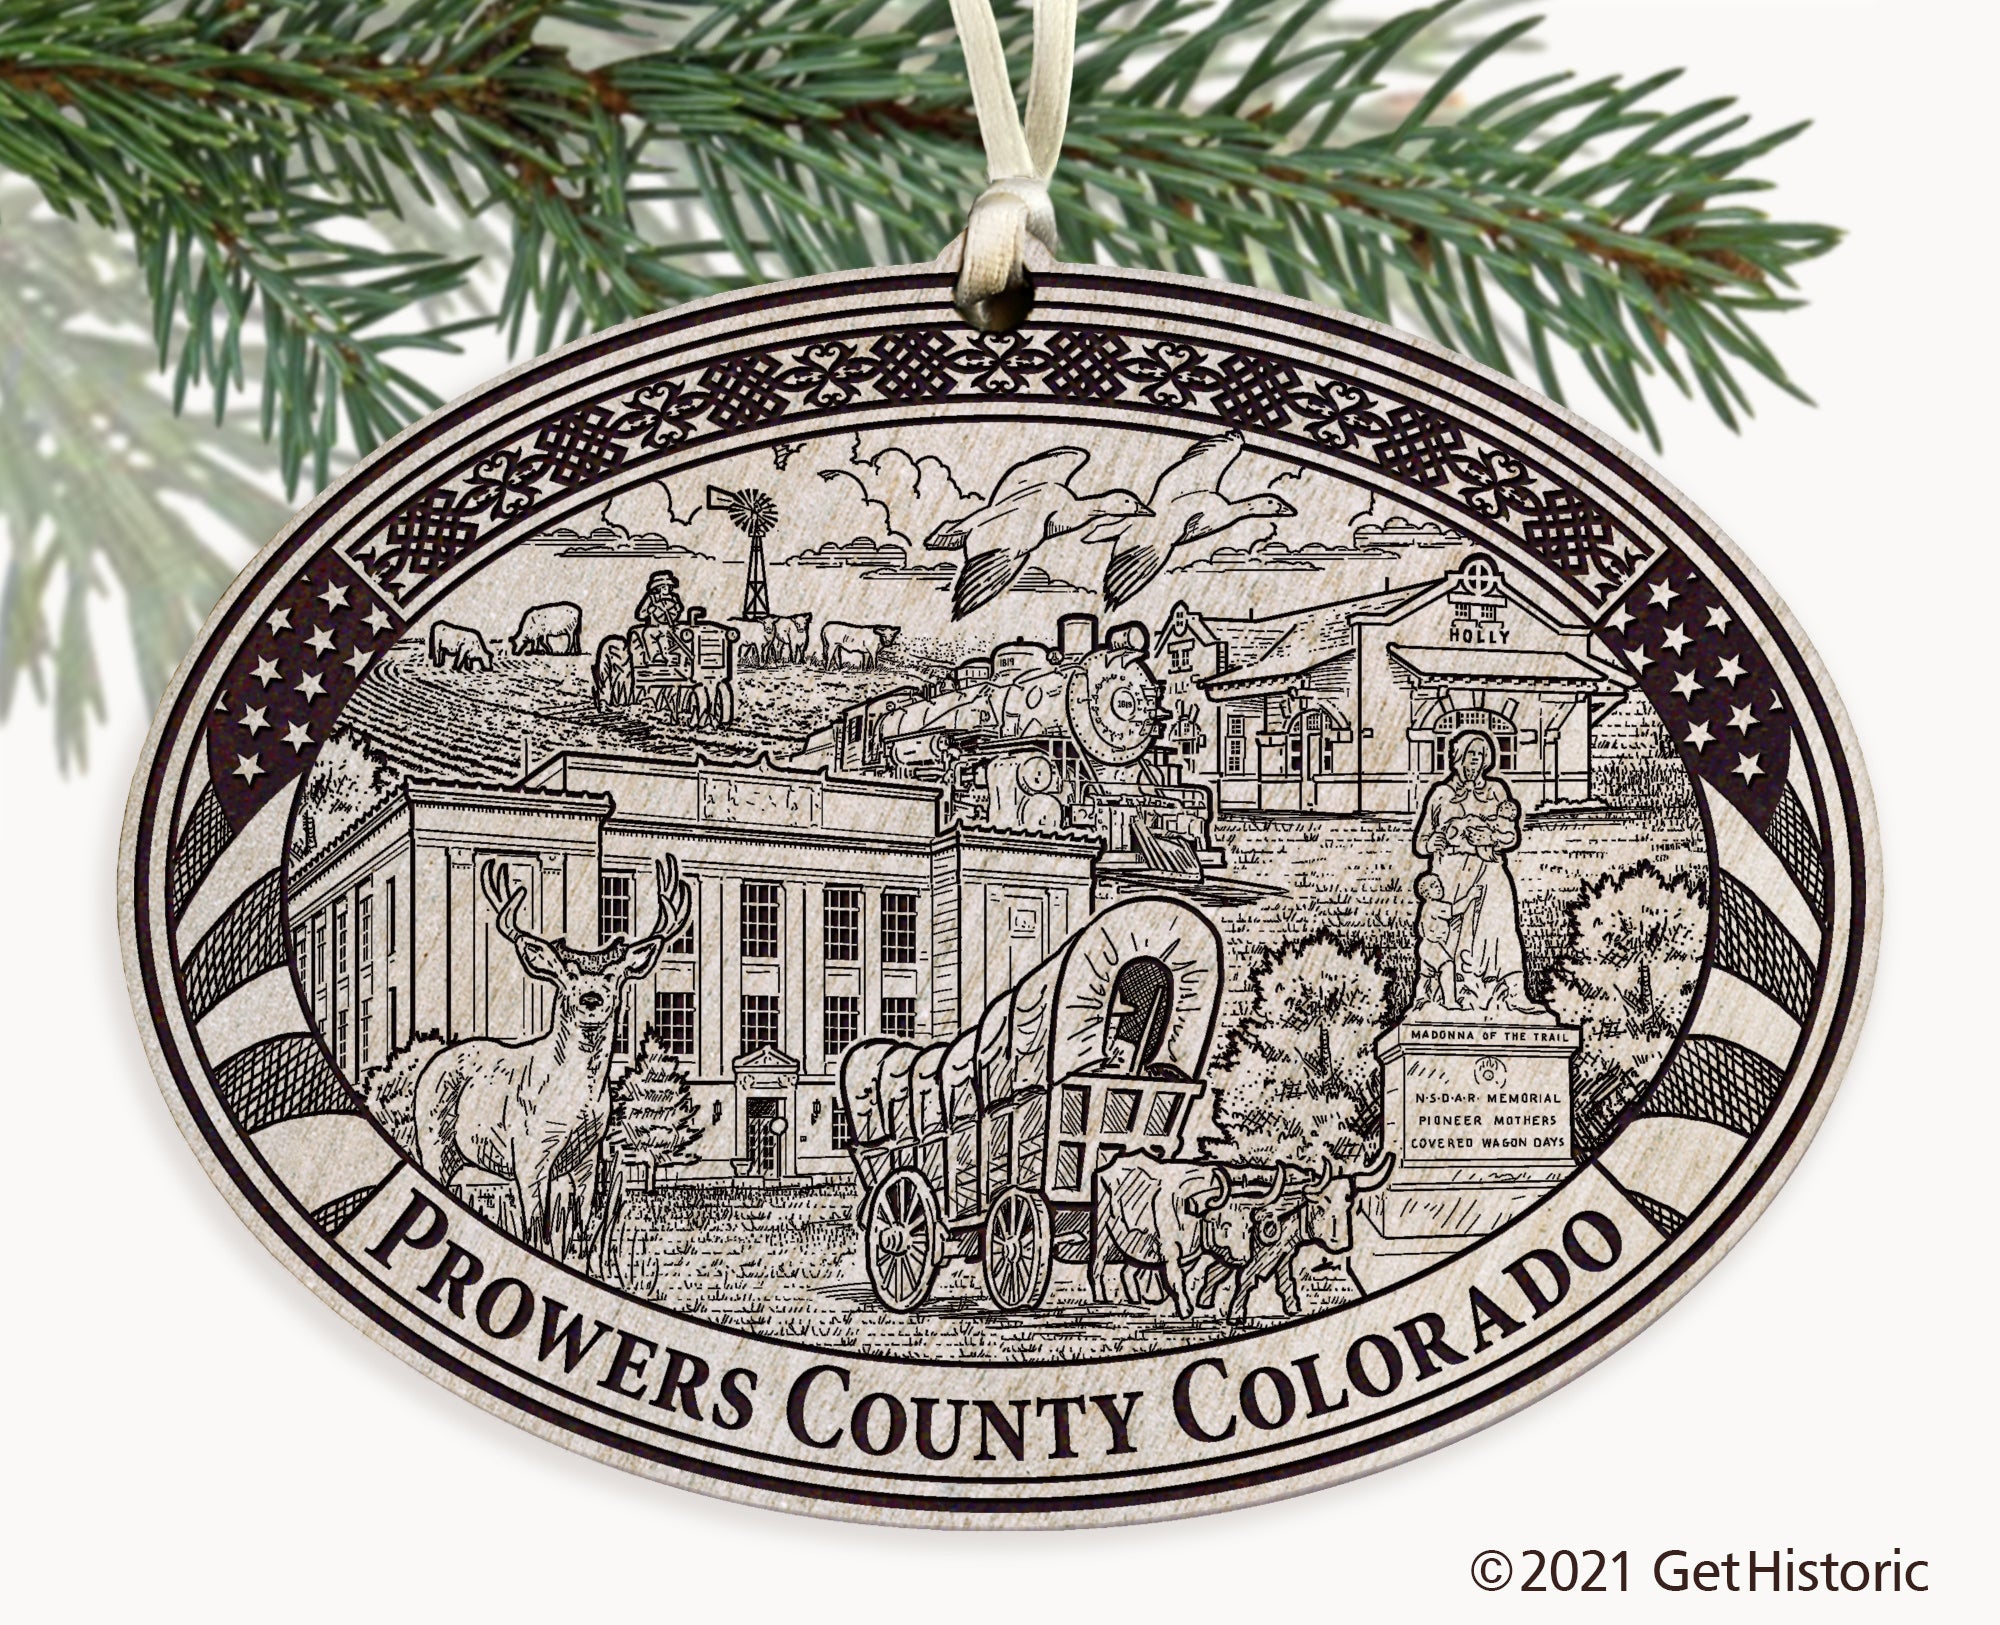 Prowers County Colorado Engraved Ornament